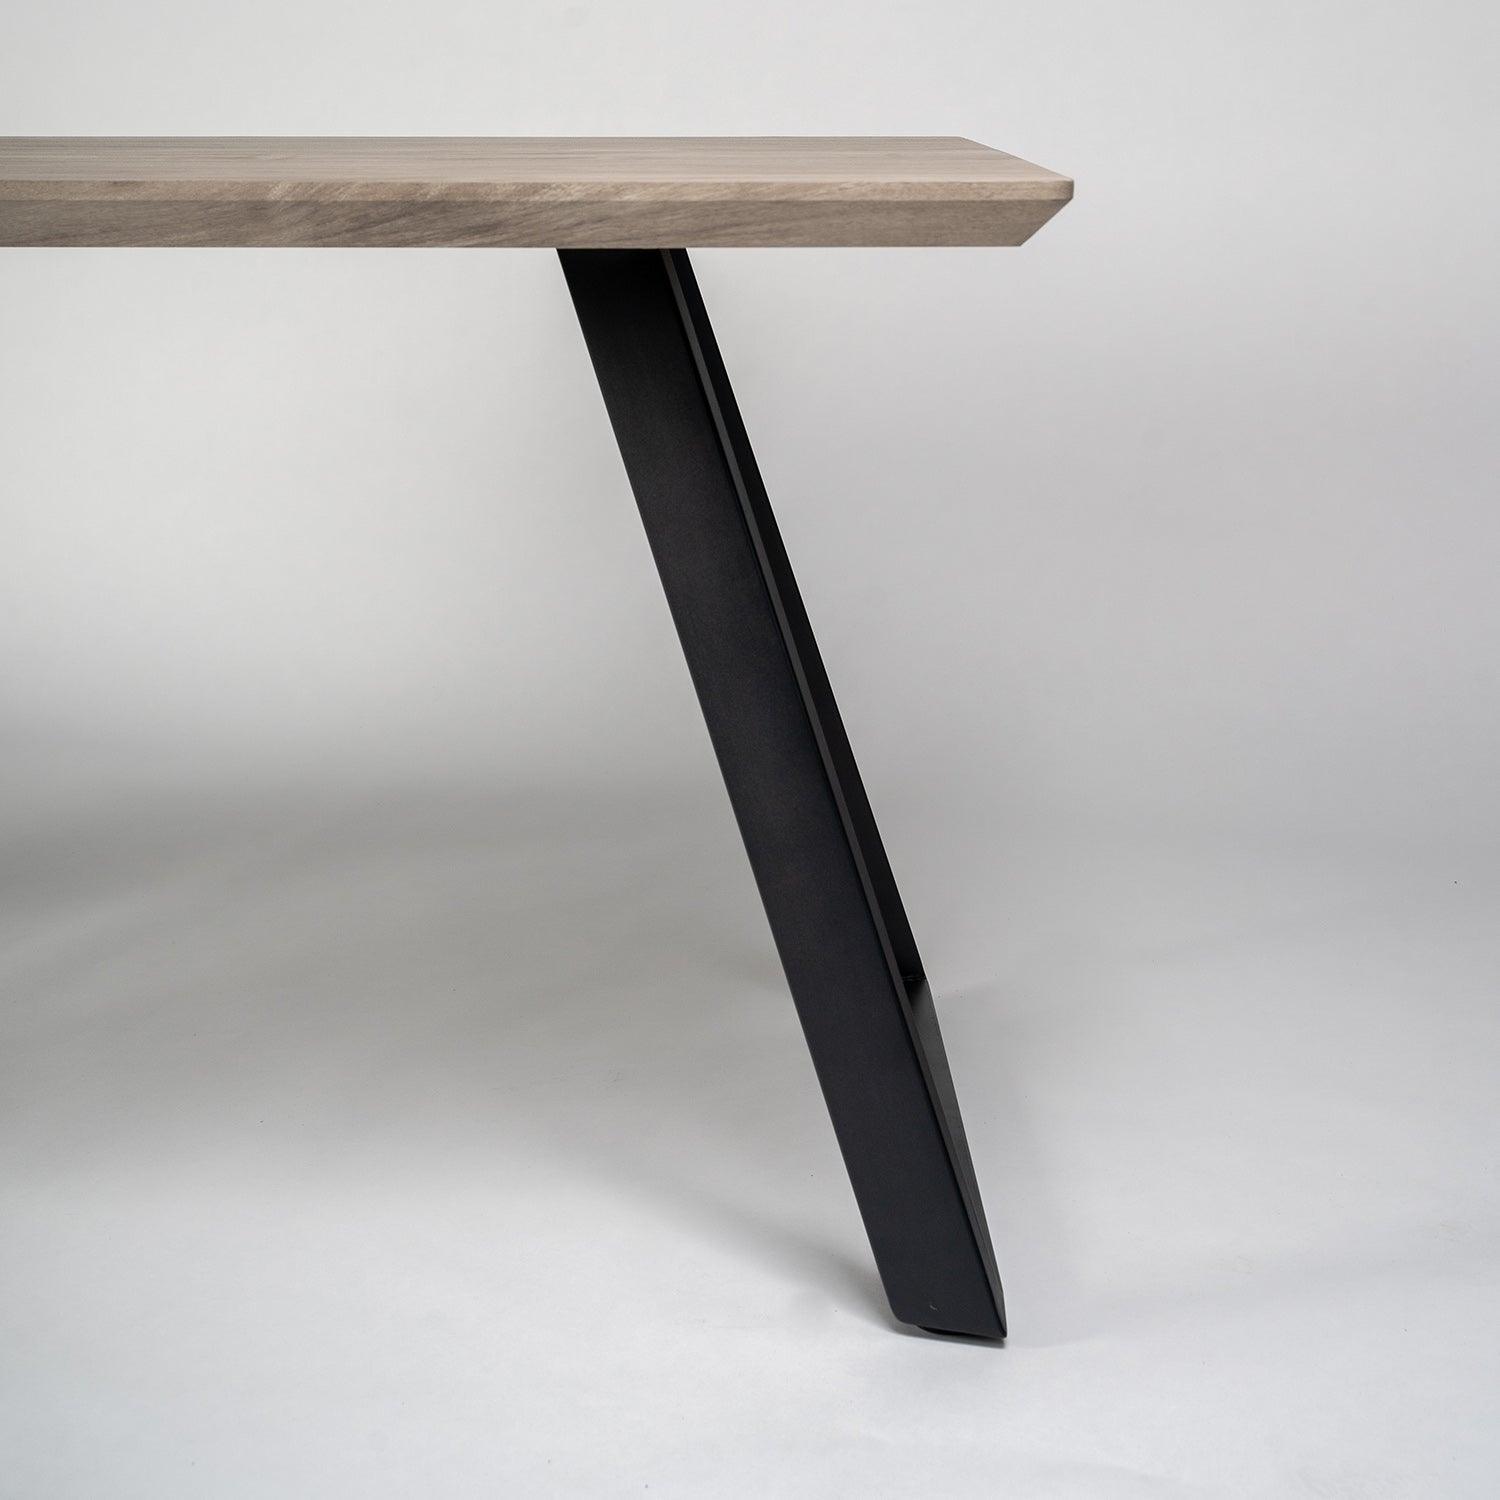 Atlas Wood Effect Dining Room Table with Black Legs